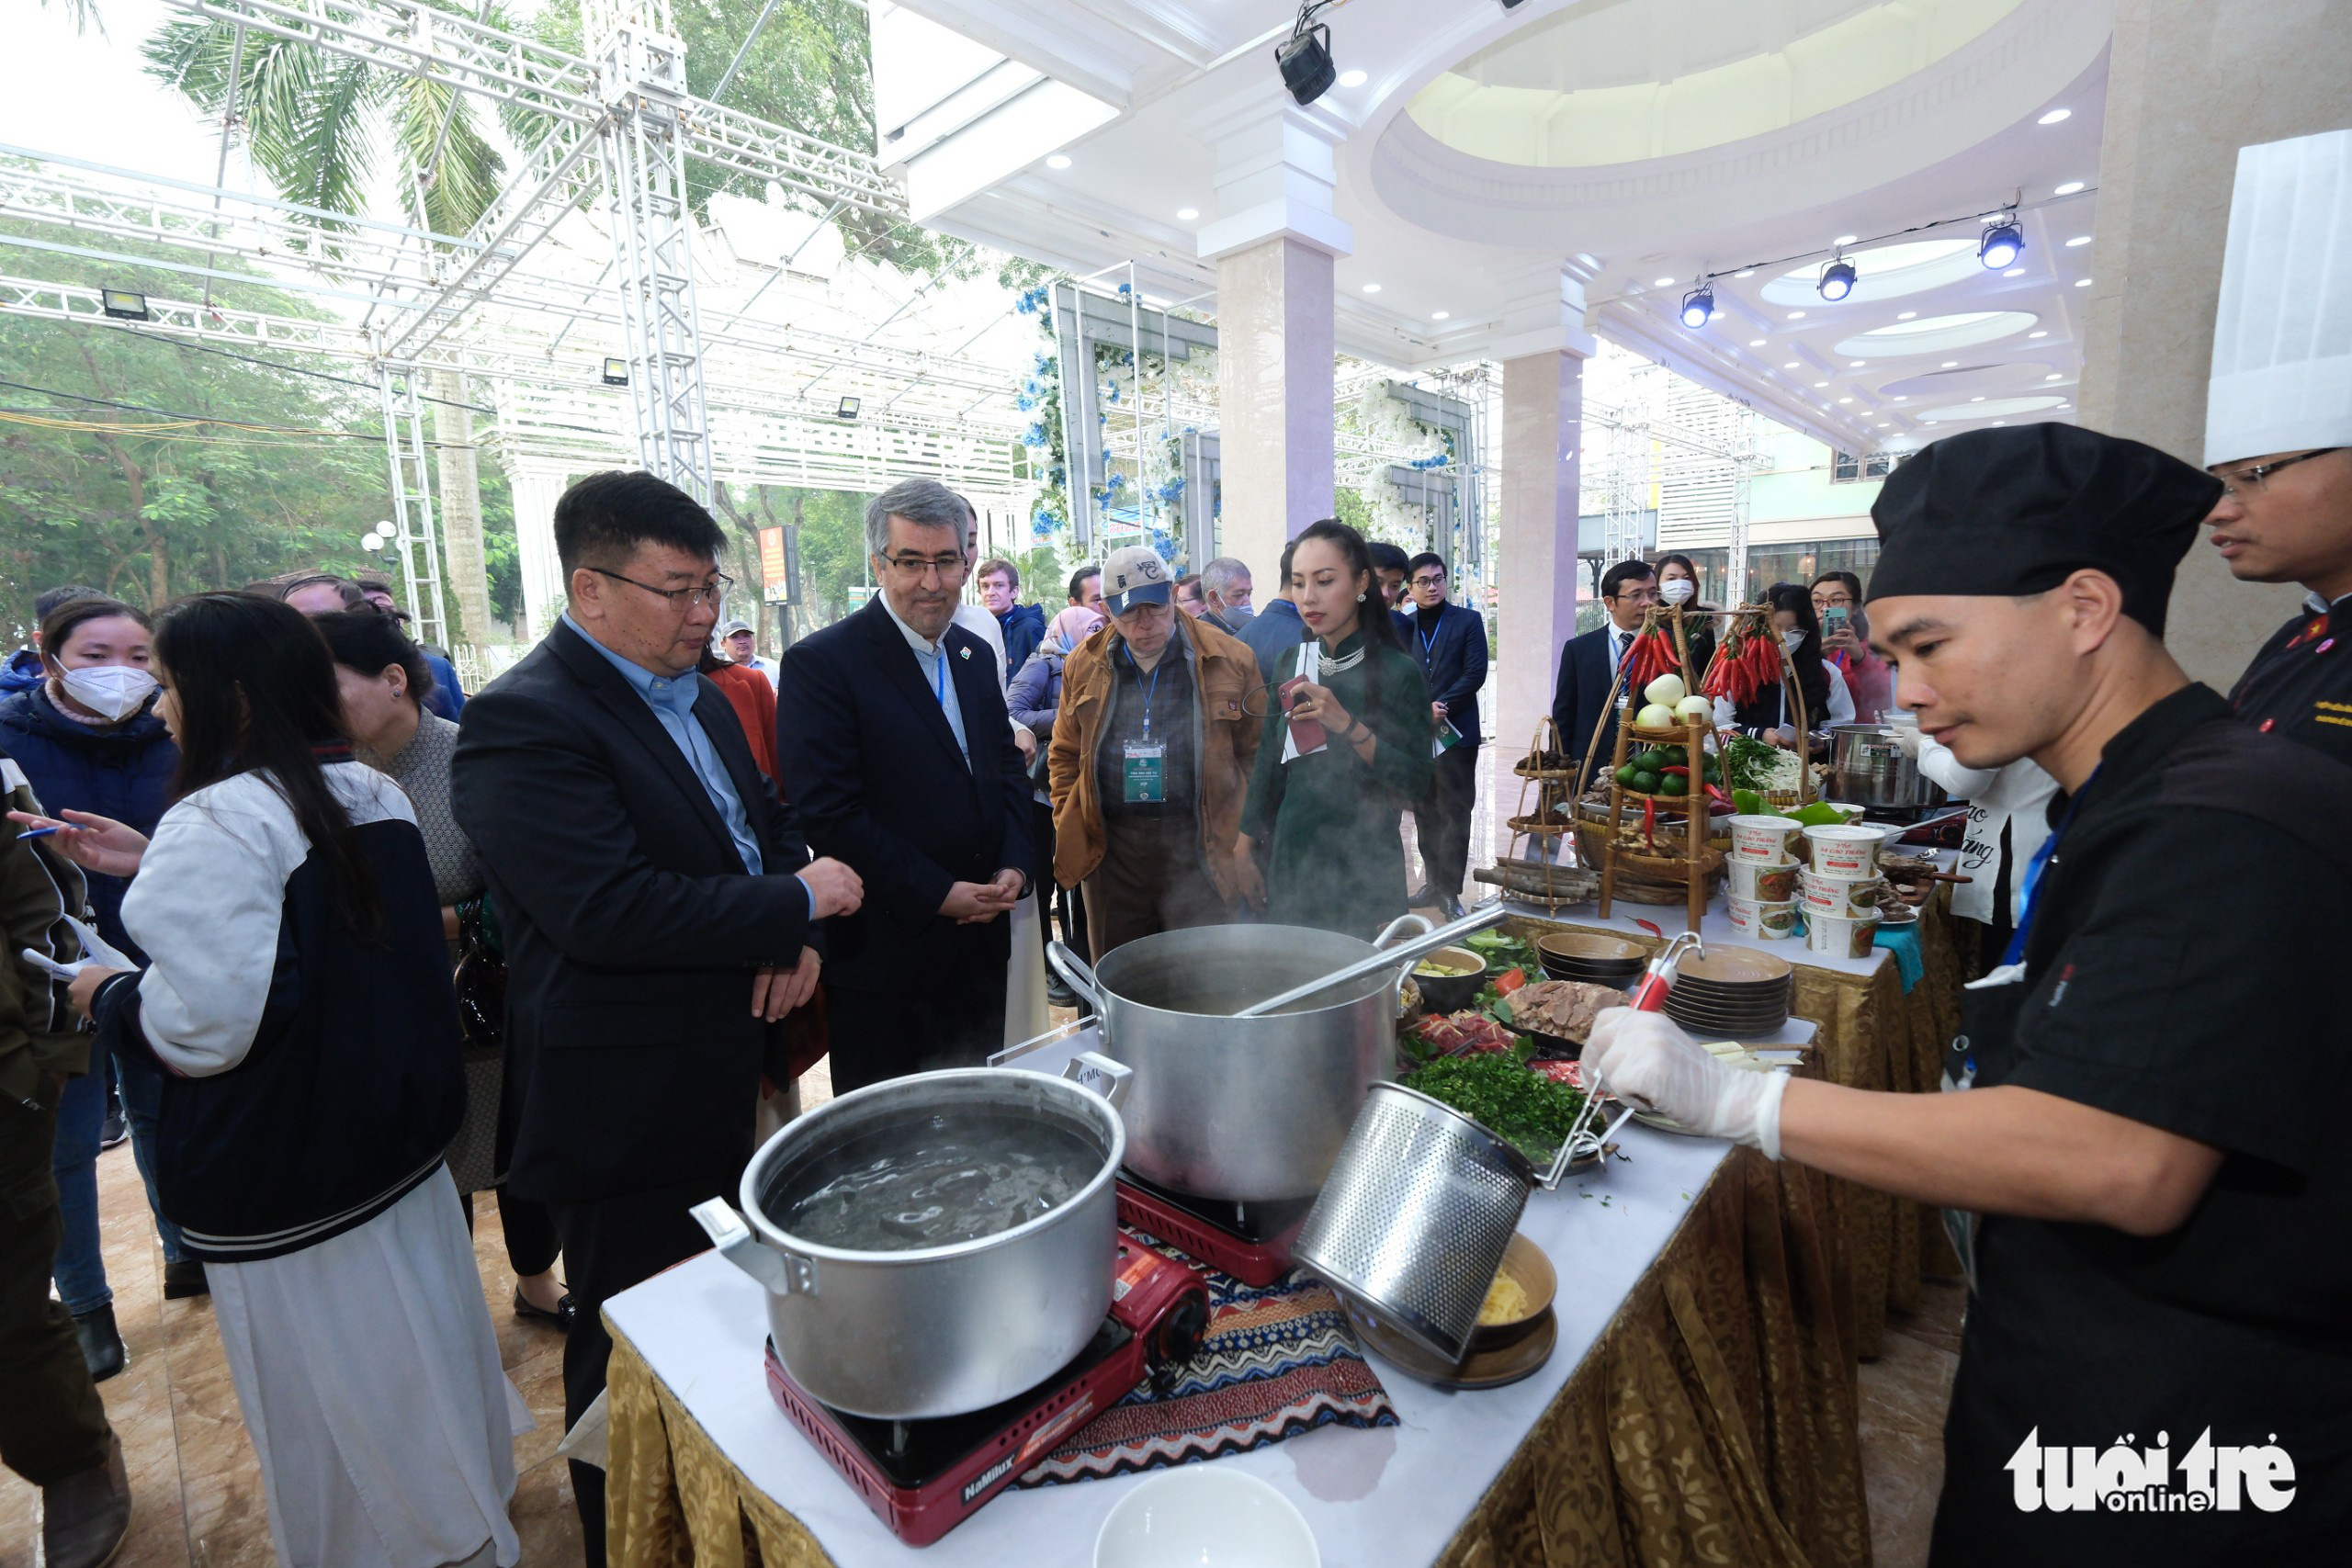 Delegates from foreign diplomatic agencies in Vietnam experience pho at the Day of Pho event organized by Tuoi Tre (Youth) newspaper in Nam Dinh Province, Vietnam, December 10, 2022. Photo: Nam Tran / Tuoi Tre